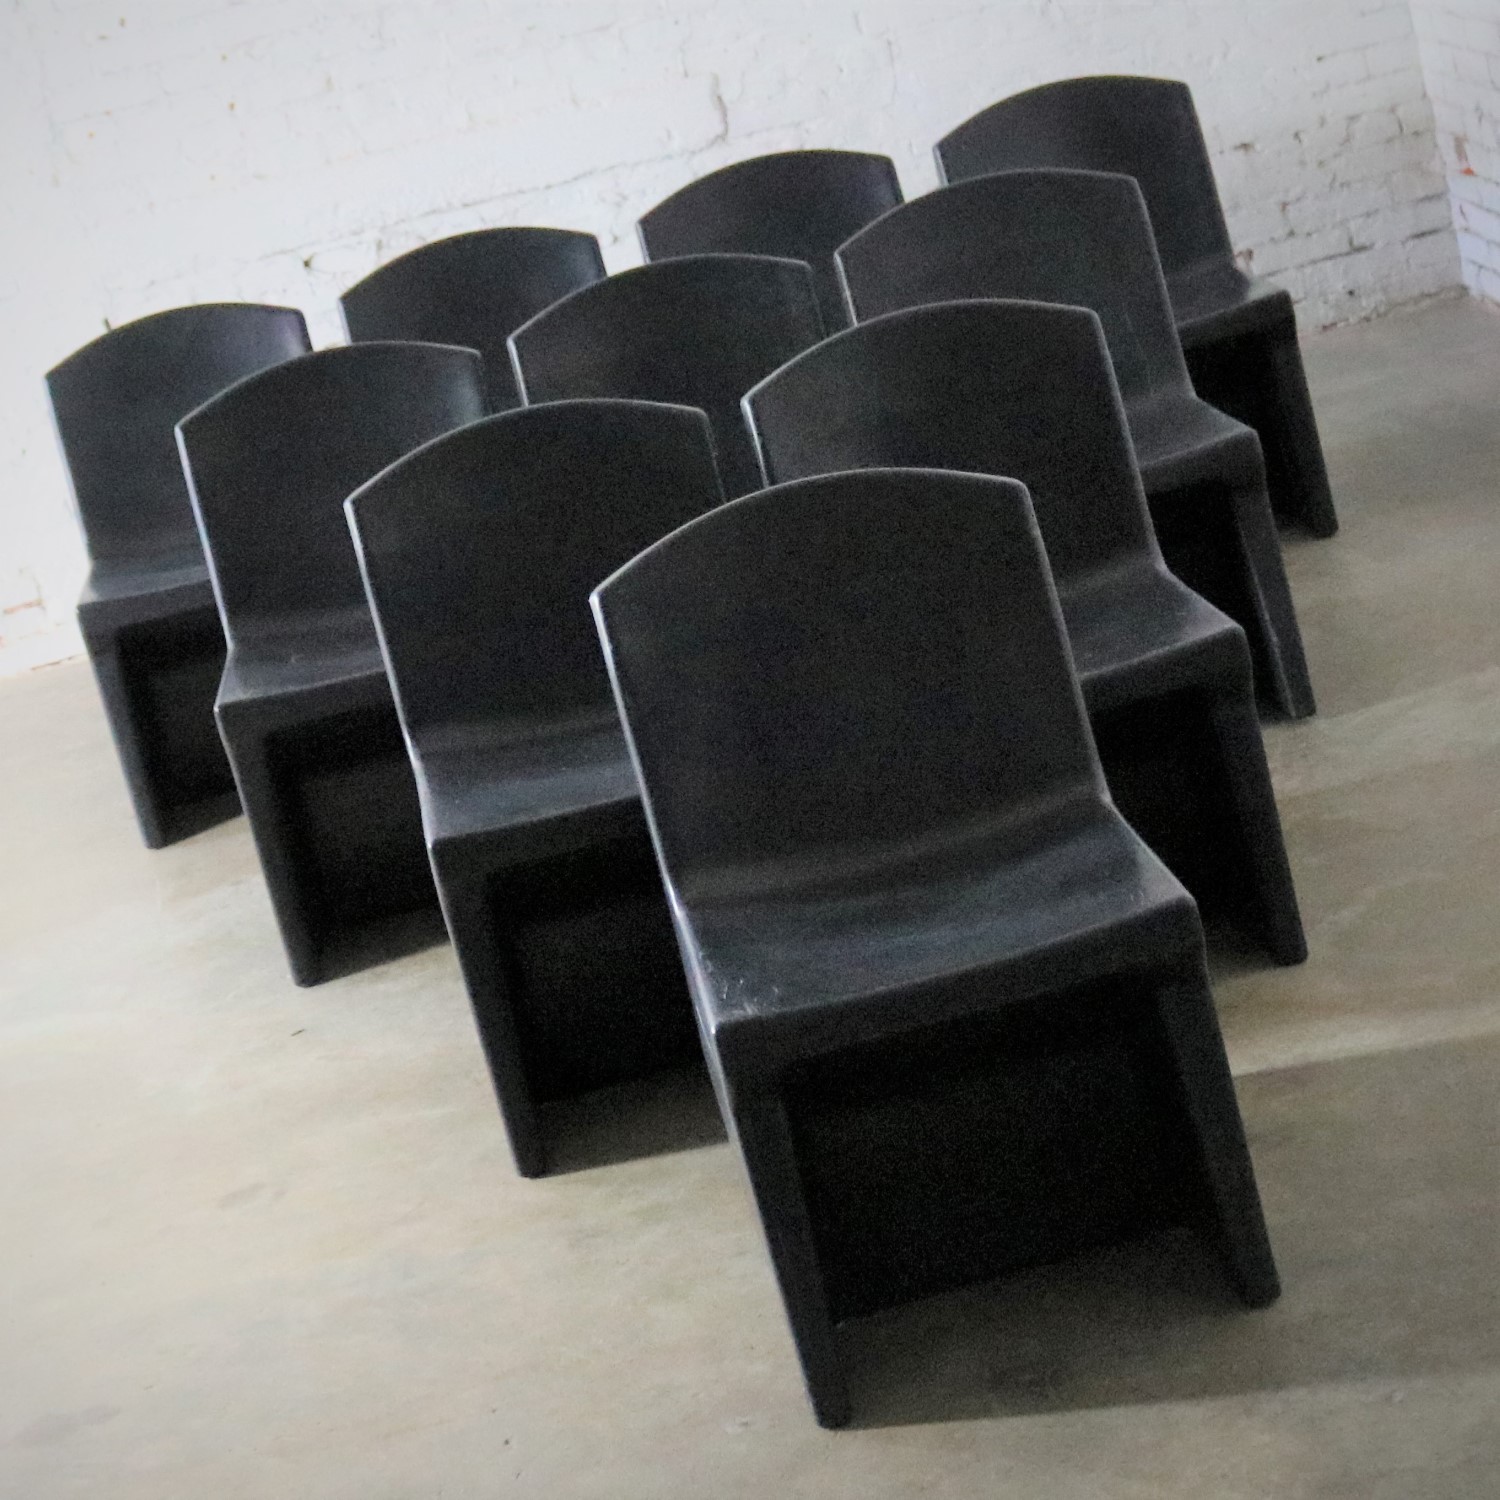 Black Molded Plastic Side or Slipper Chairs by Norix Set of Ten